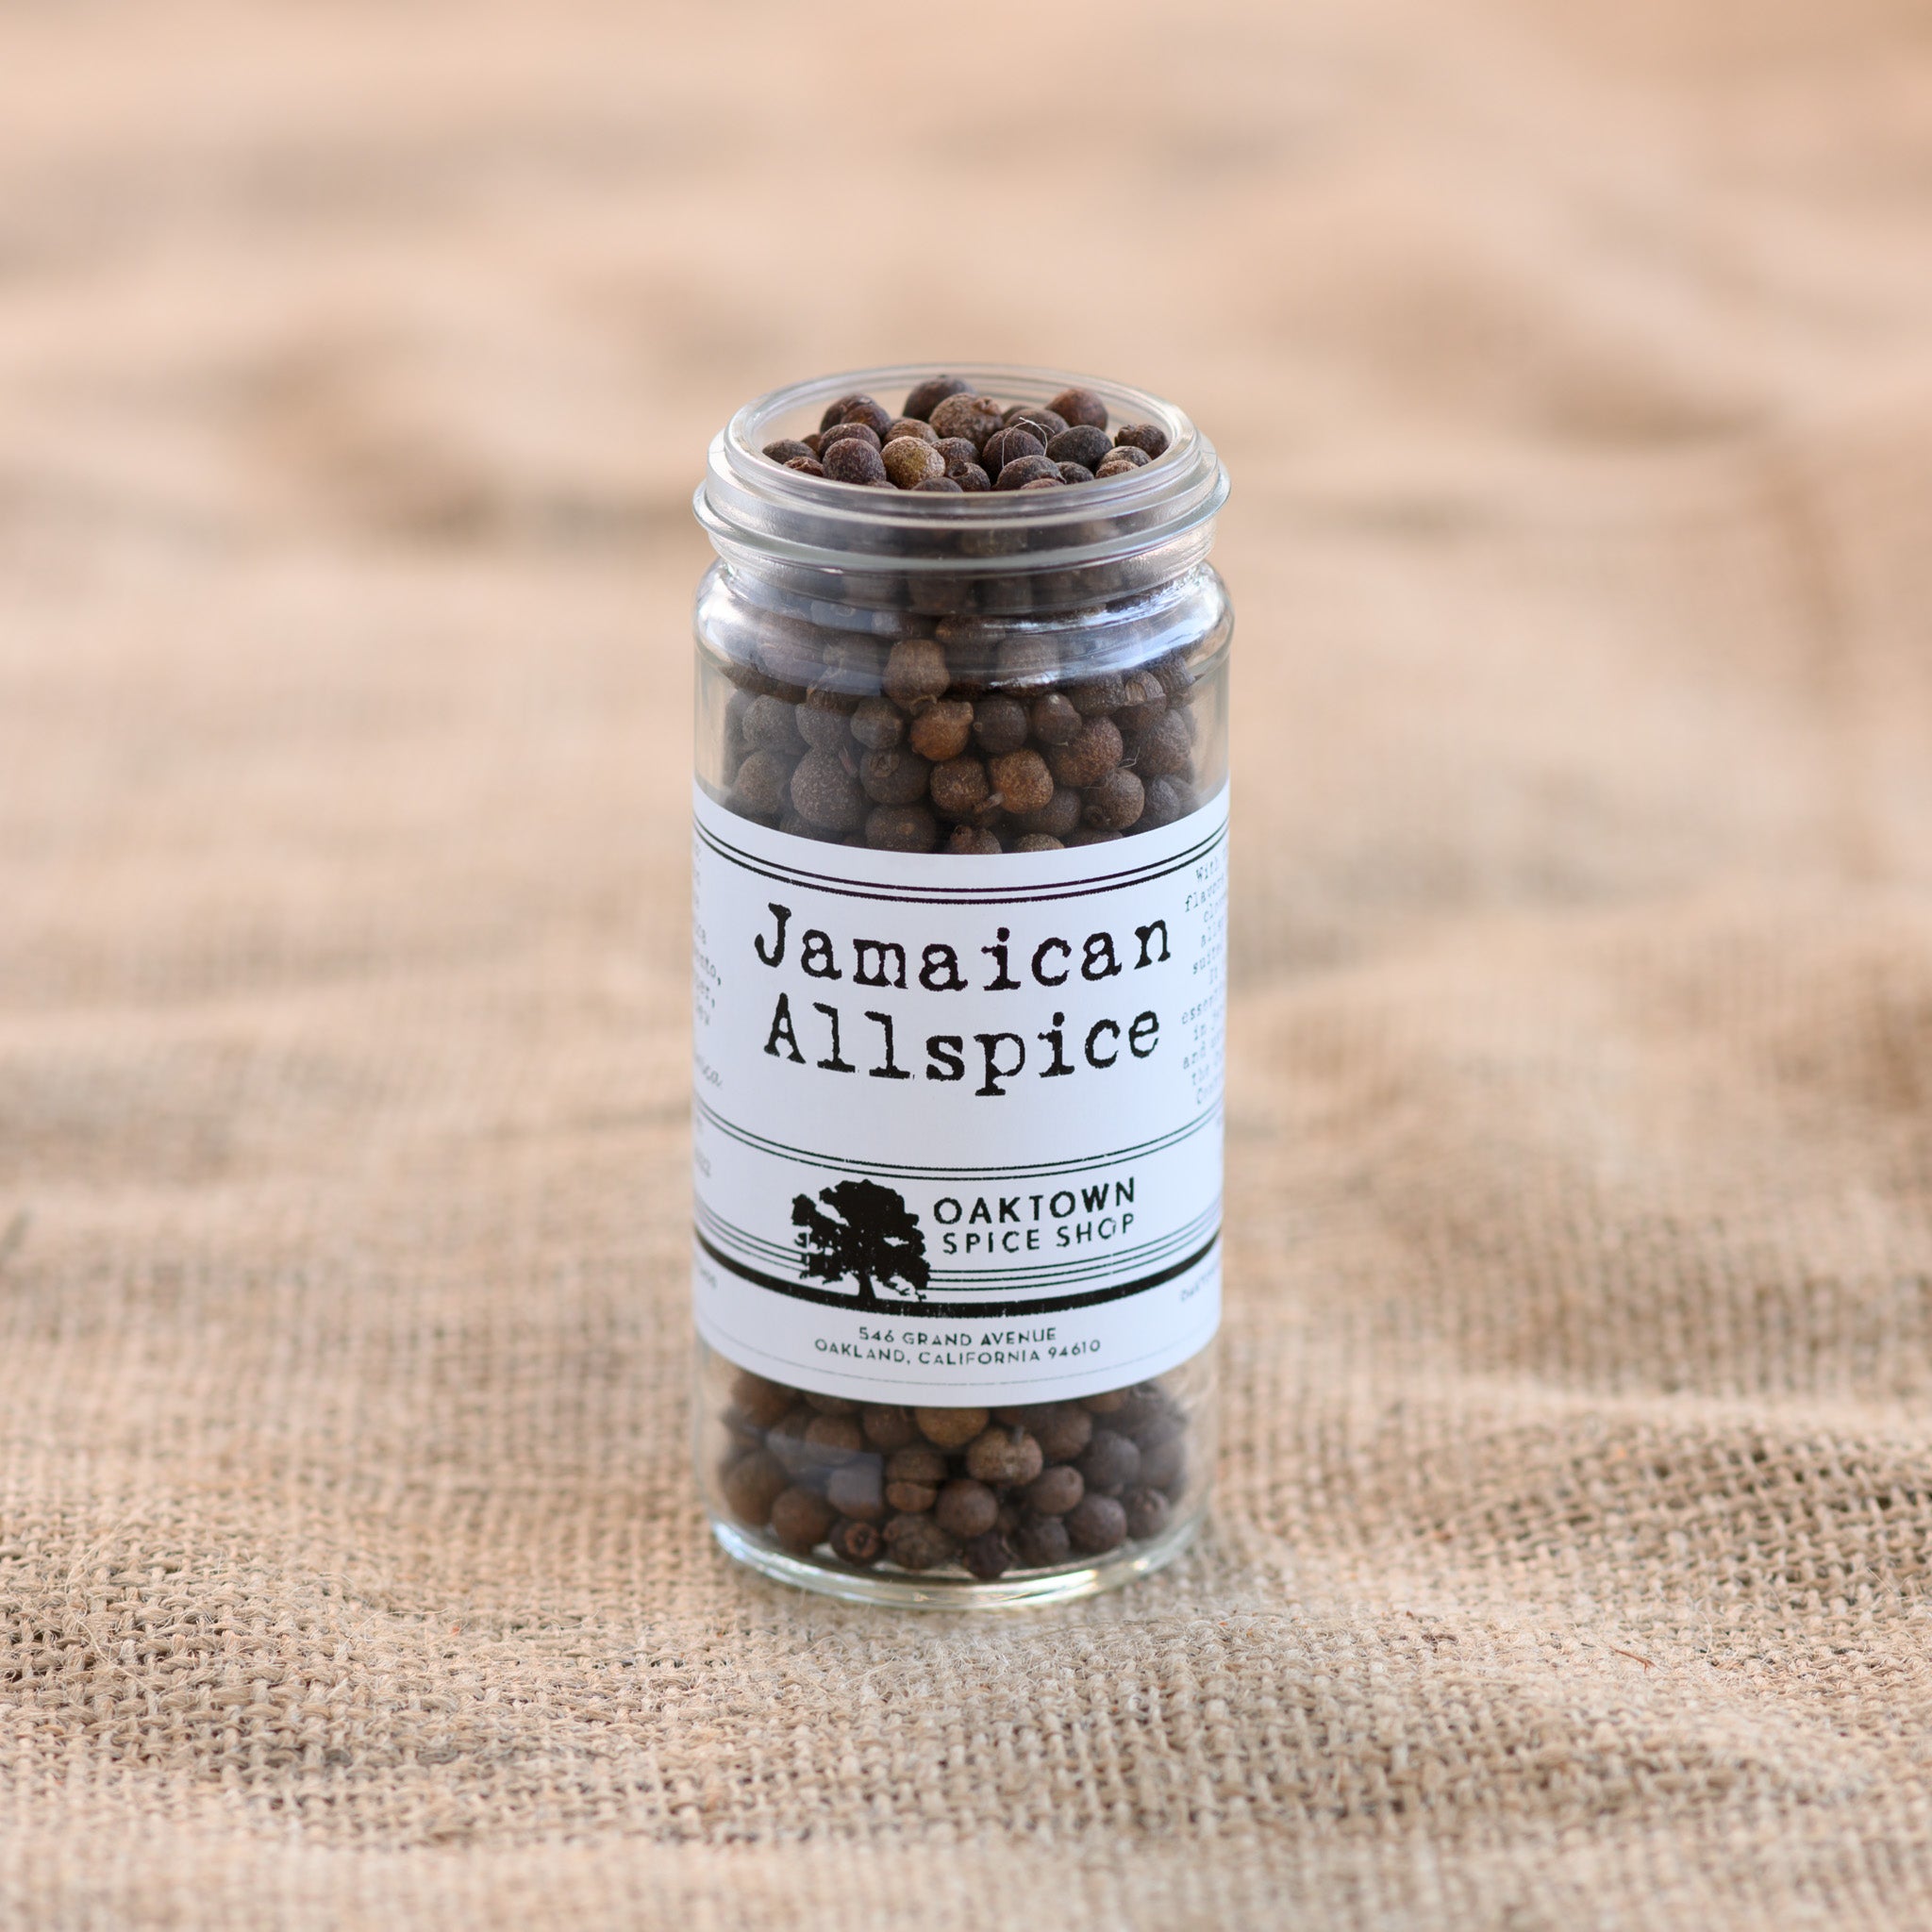 Whole Allspice Berries with the Combined Flavors of Cinnamon Nutmeg and Ginger Online at Oaktown Spice Shop